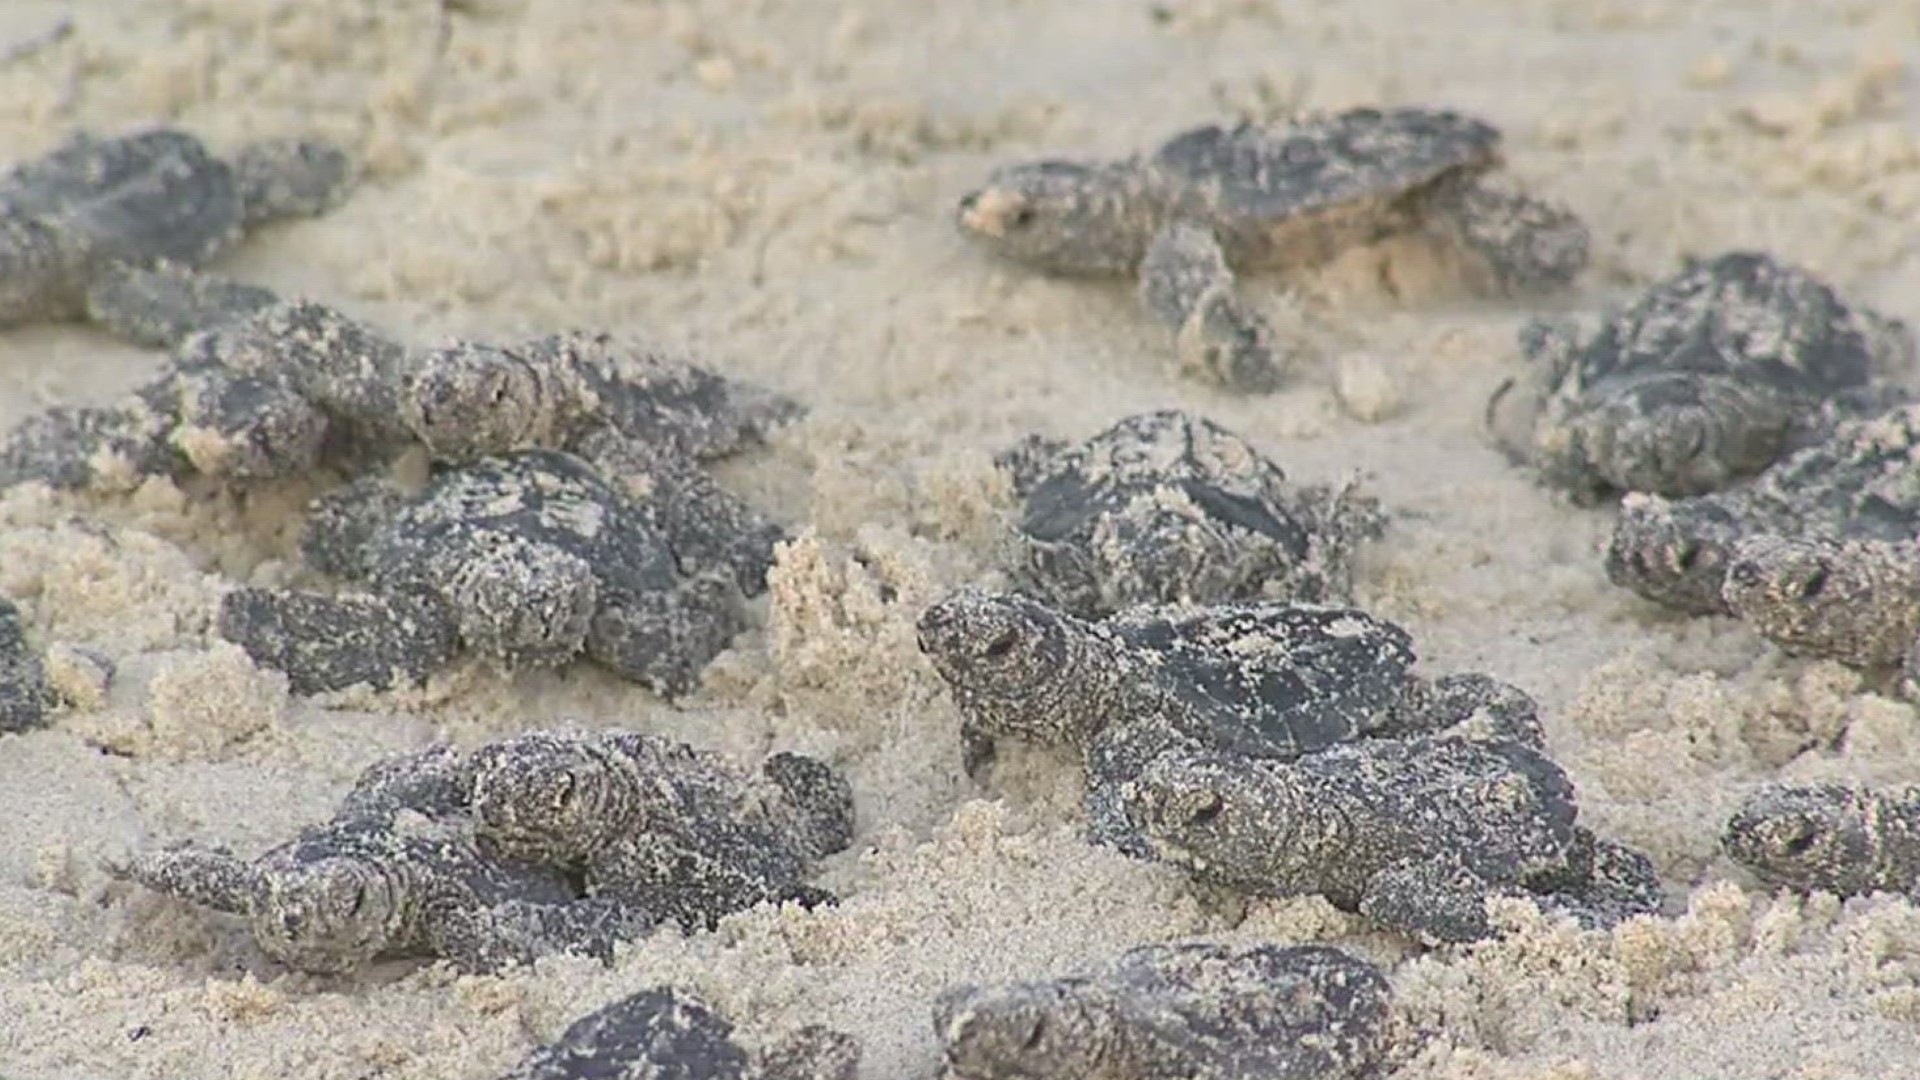 Kemps ridley sea turtles have been nesting on Coastal Bend beaches for about a month.